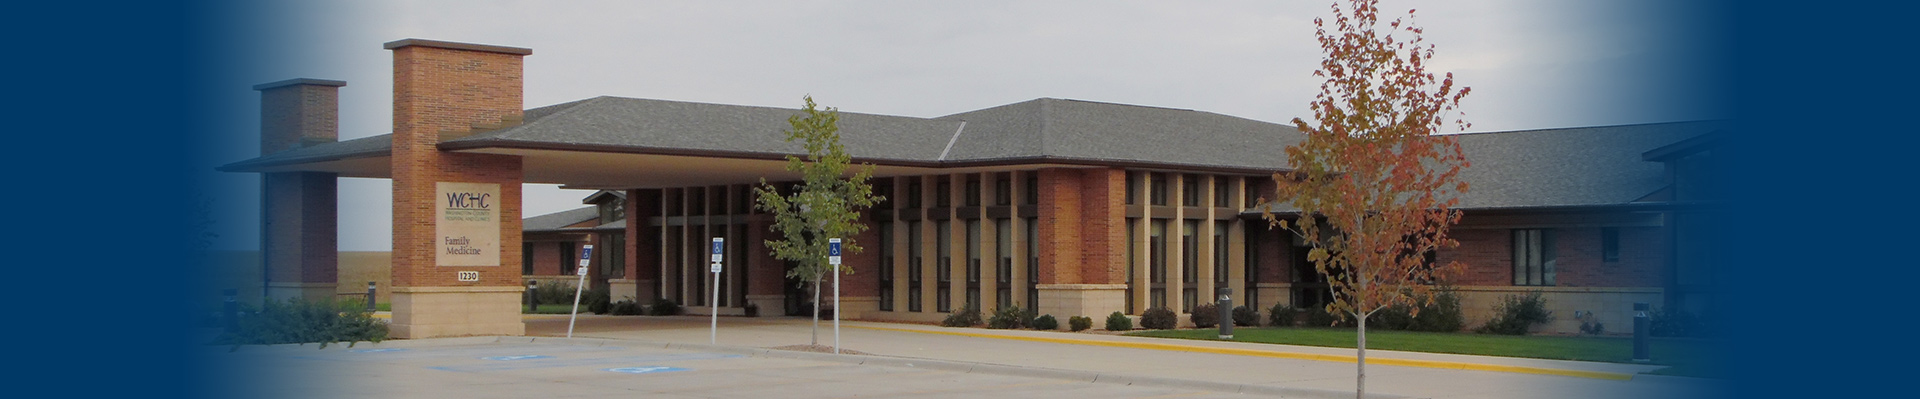 Banner picture of WCHC Family Medicine building.